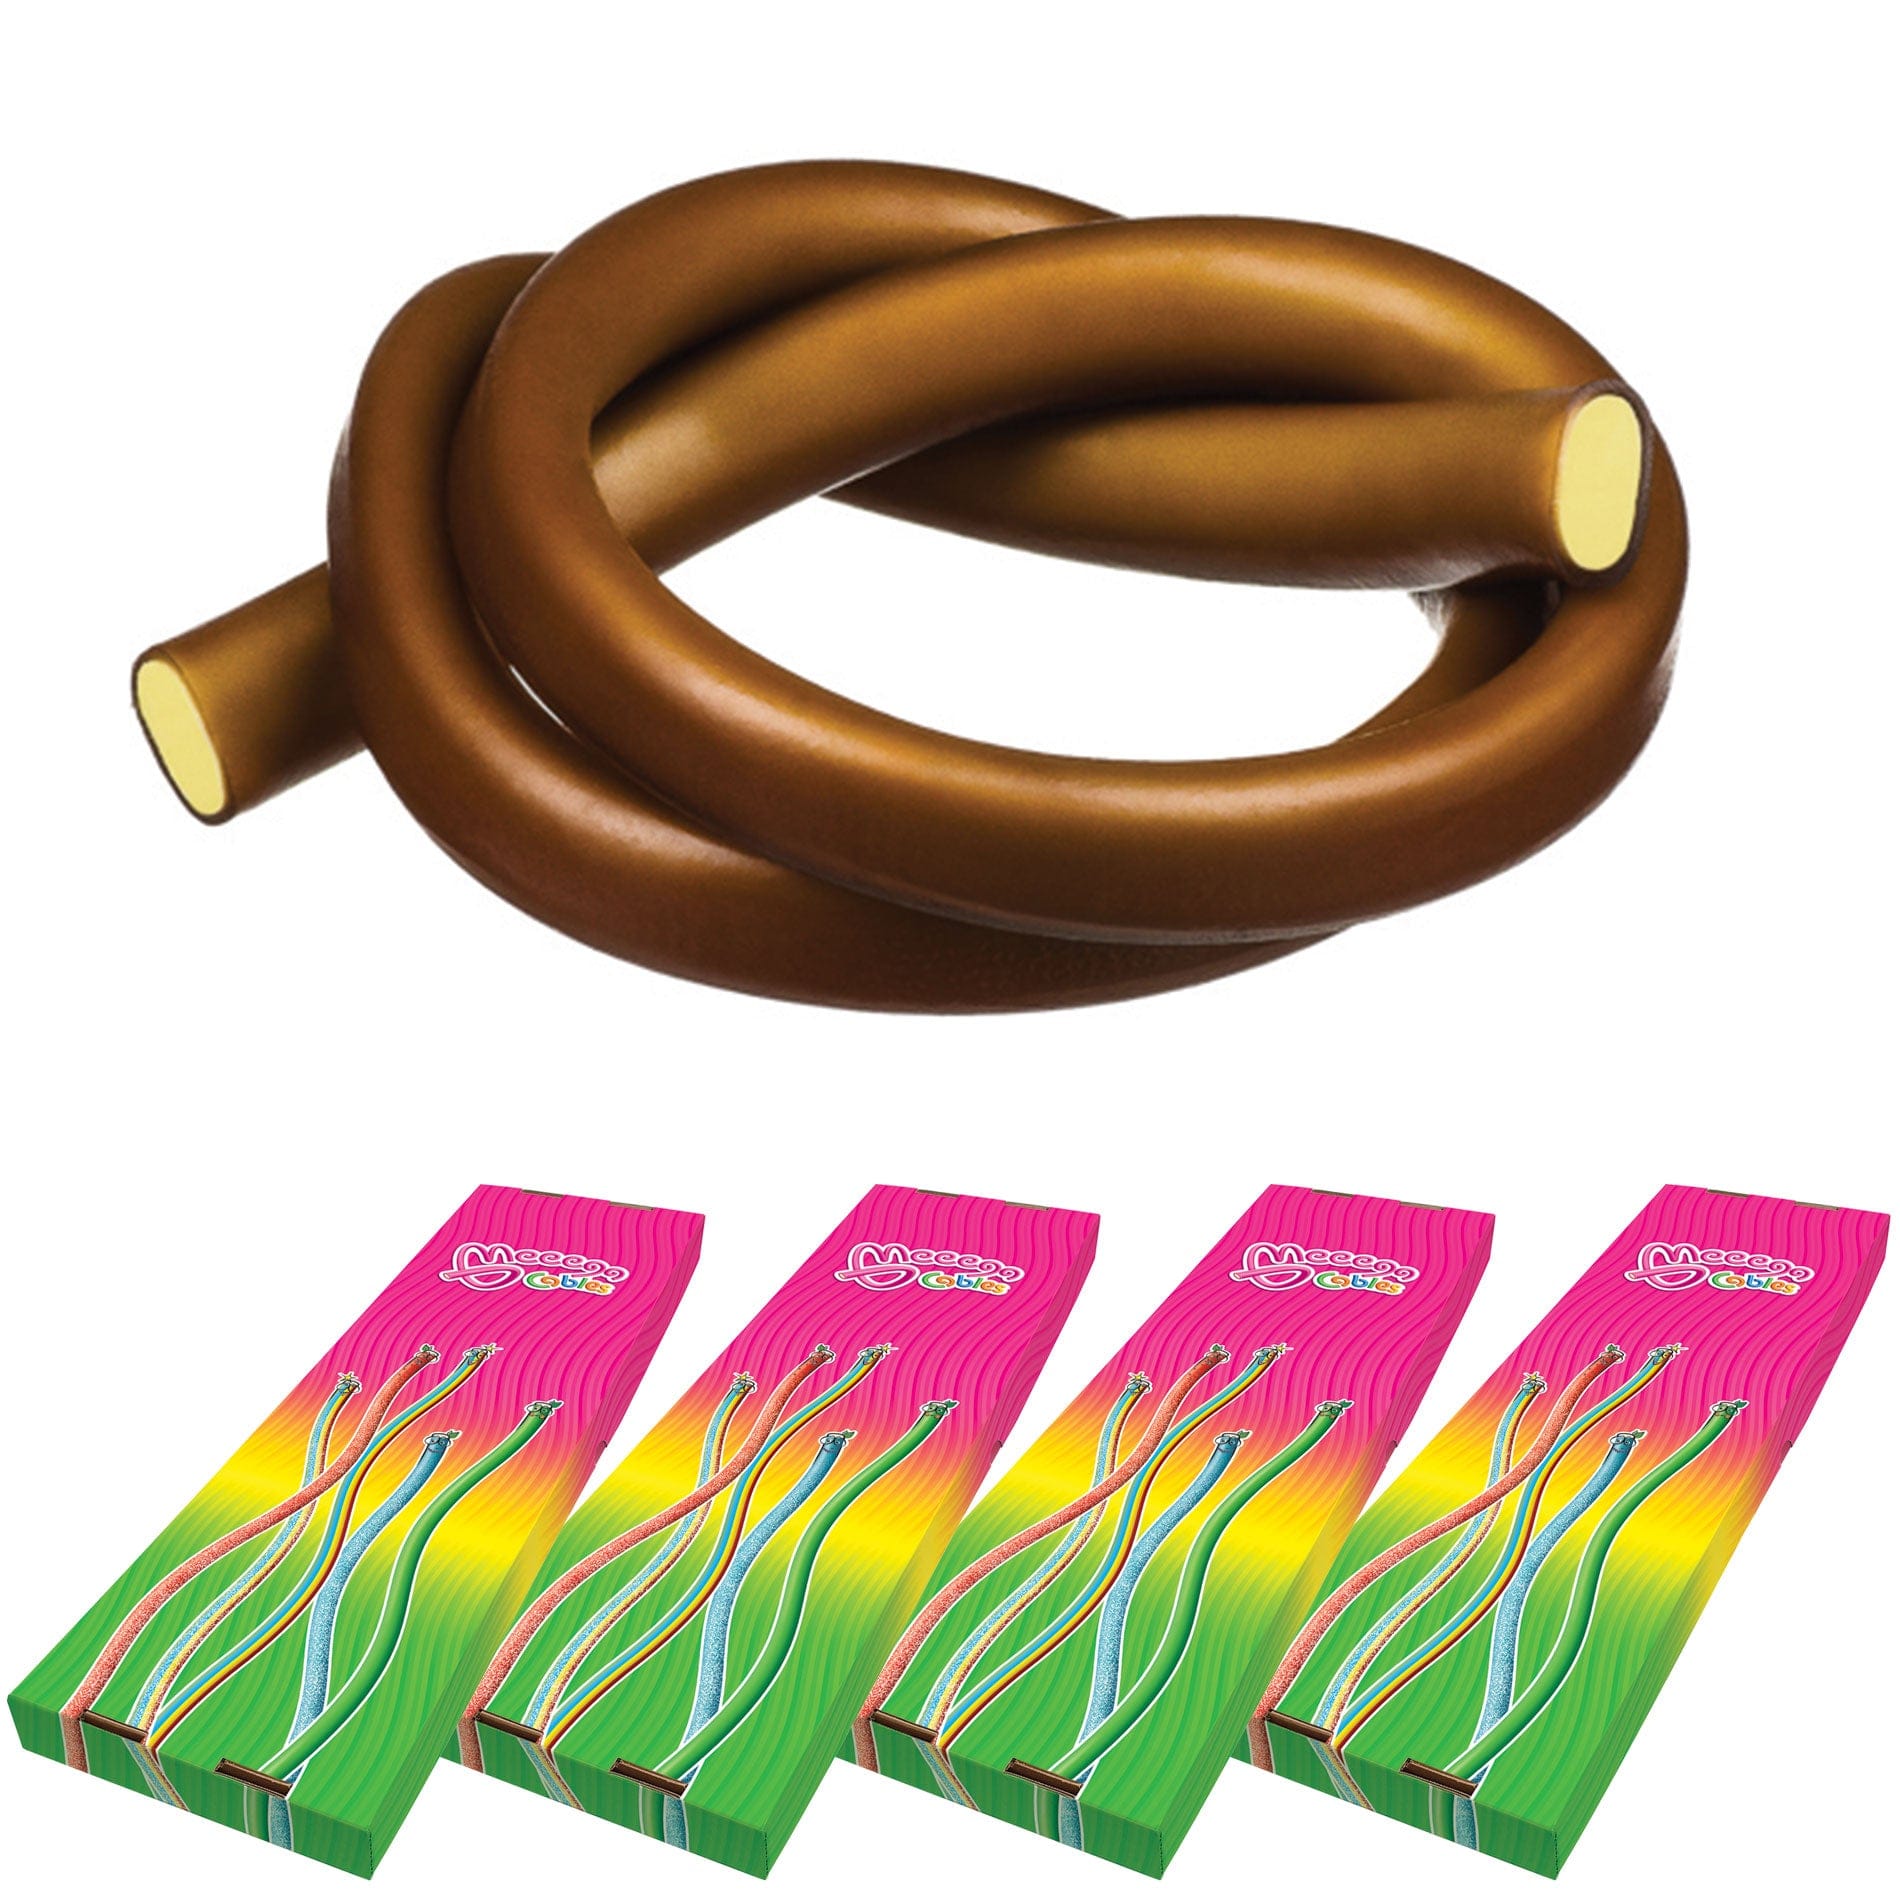 Novelty Concessions Gummy Rope COLA / 4 Pack (120 pieces) Meeega Cables European Chewy Rope Candy - Box of 30 individually wrapped Meeega Cables, each over 2-feet long cups with lids and straws